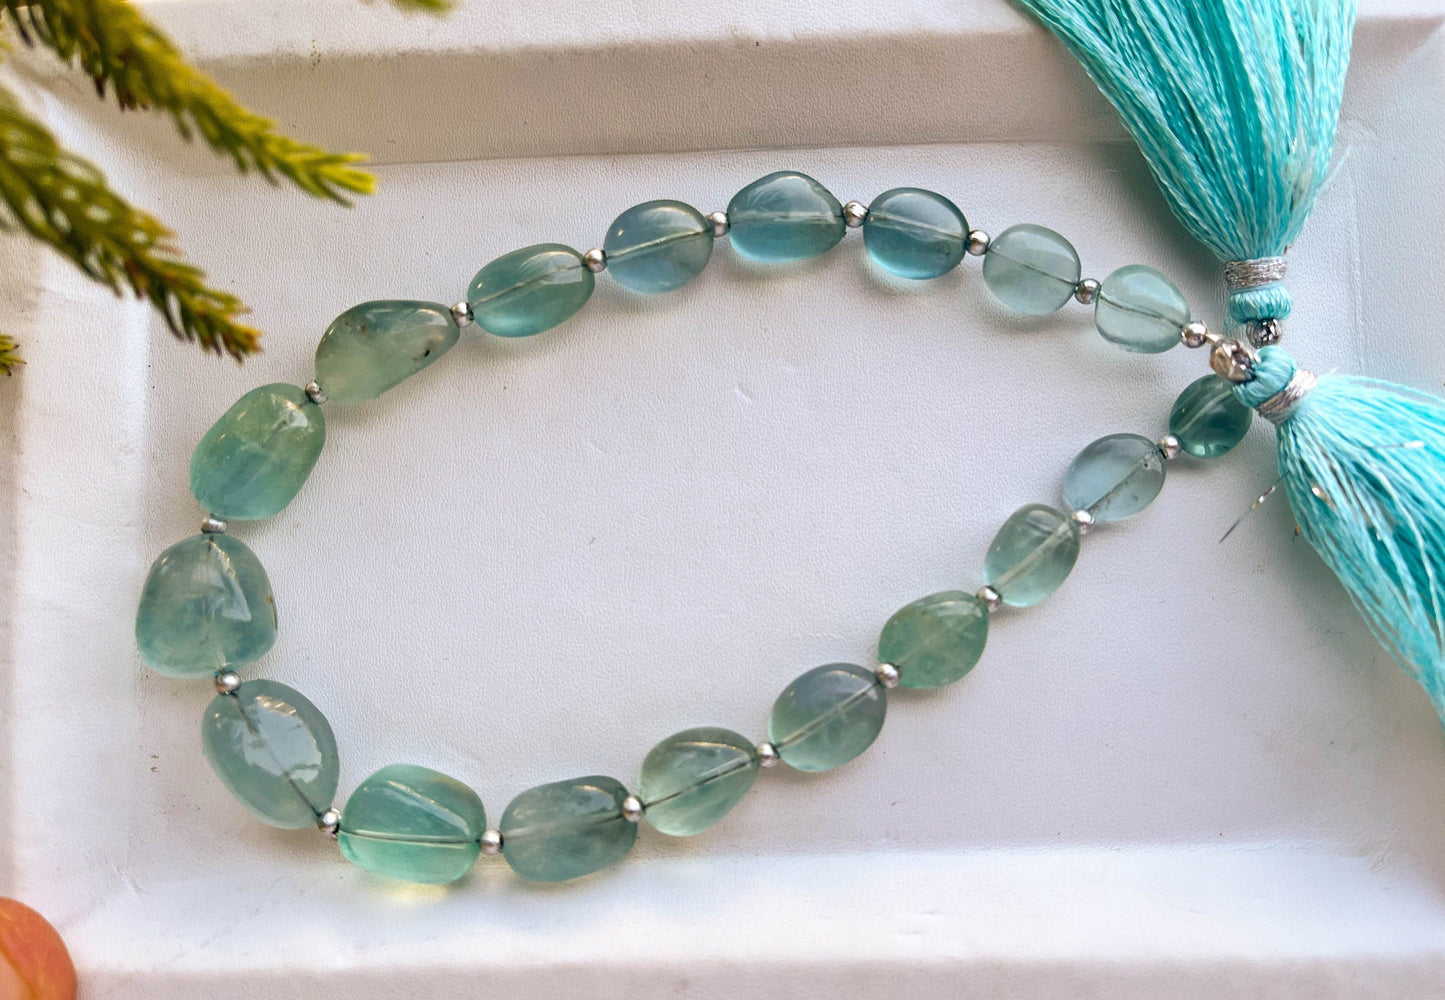 Teal Blue Fluorite Smooth Tumble Beads, Natural Fluorite Gemstone Beads, Fluorite Beads, 9 inch, 18 Pieces, Beadsforyourjewellery BFYJ74-6 Beadsforyourjewelry